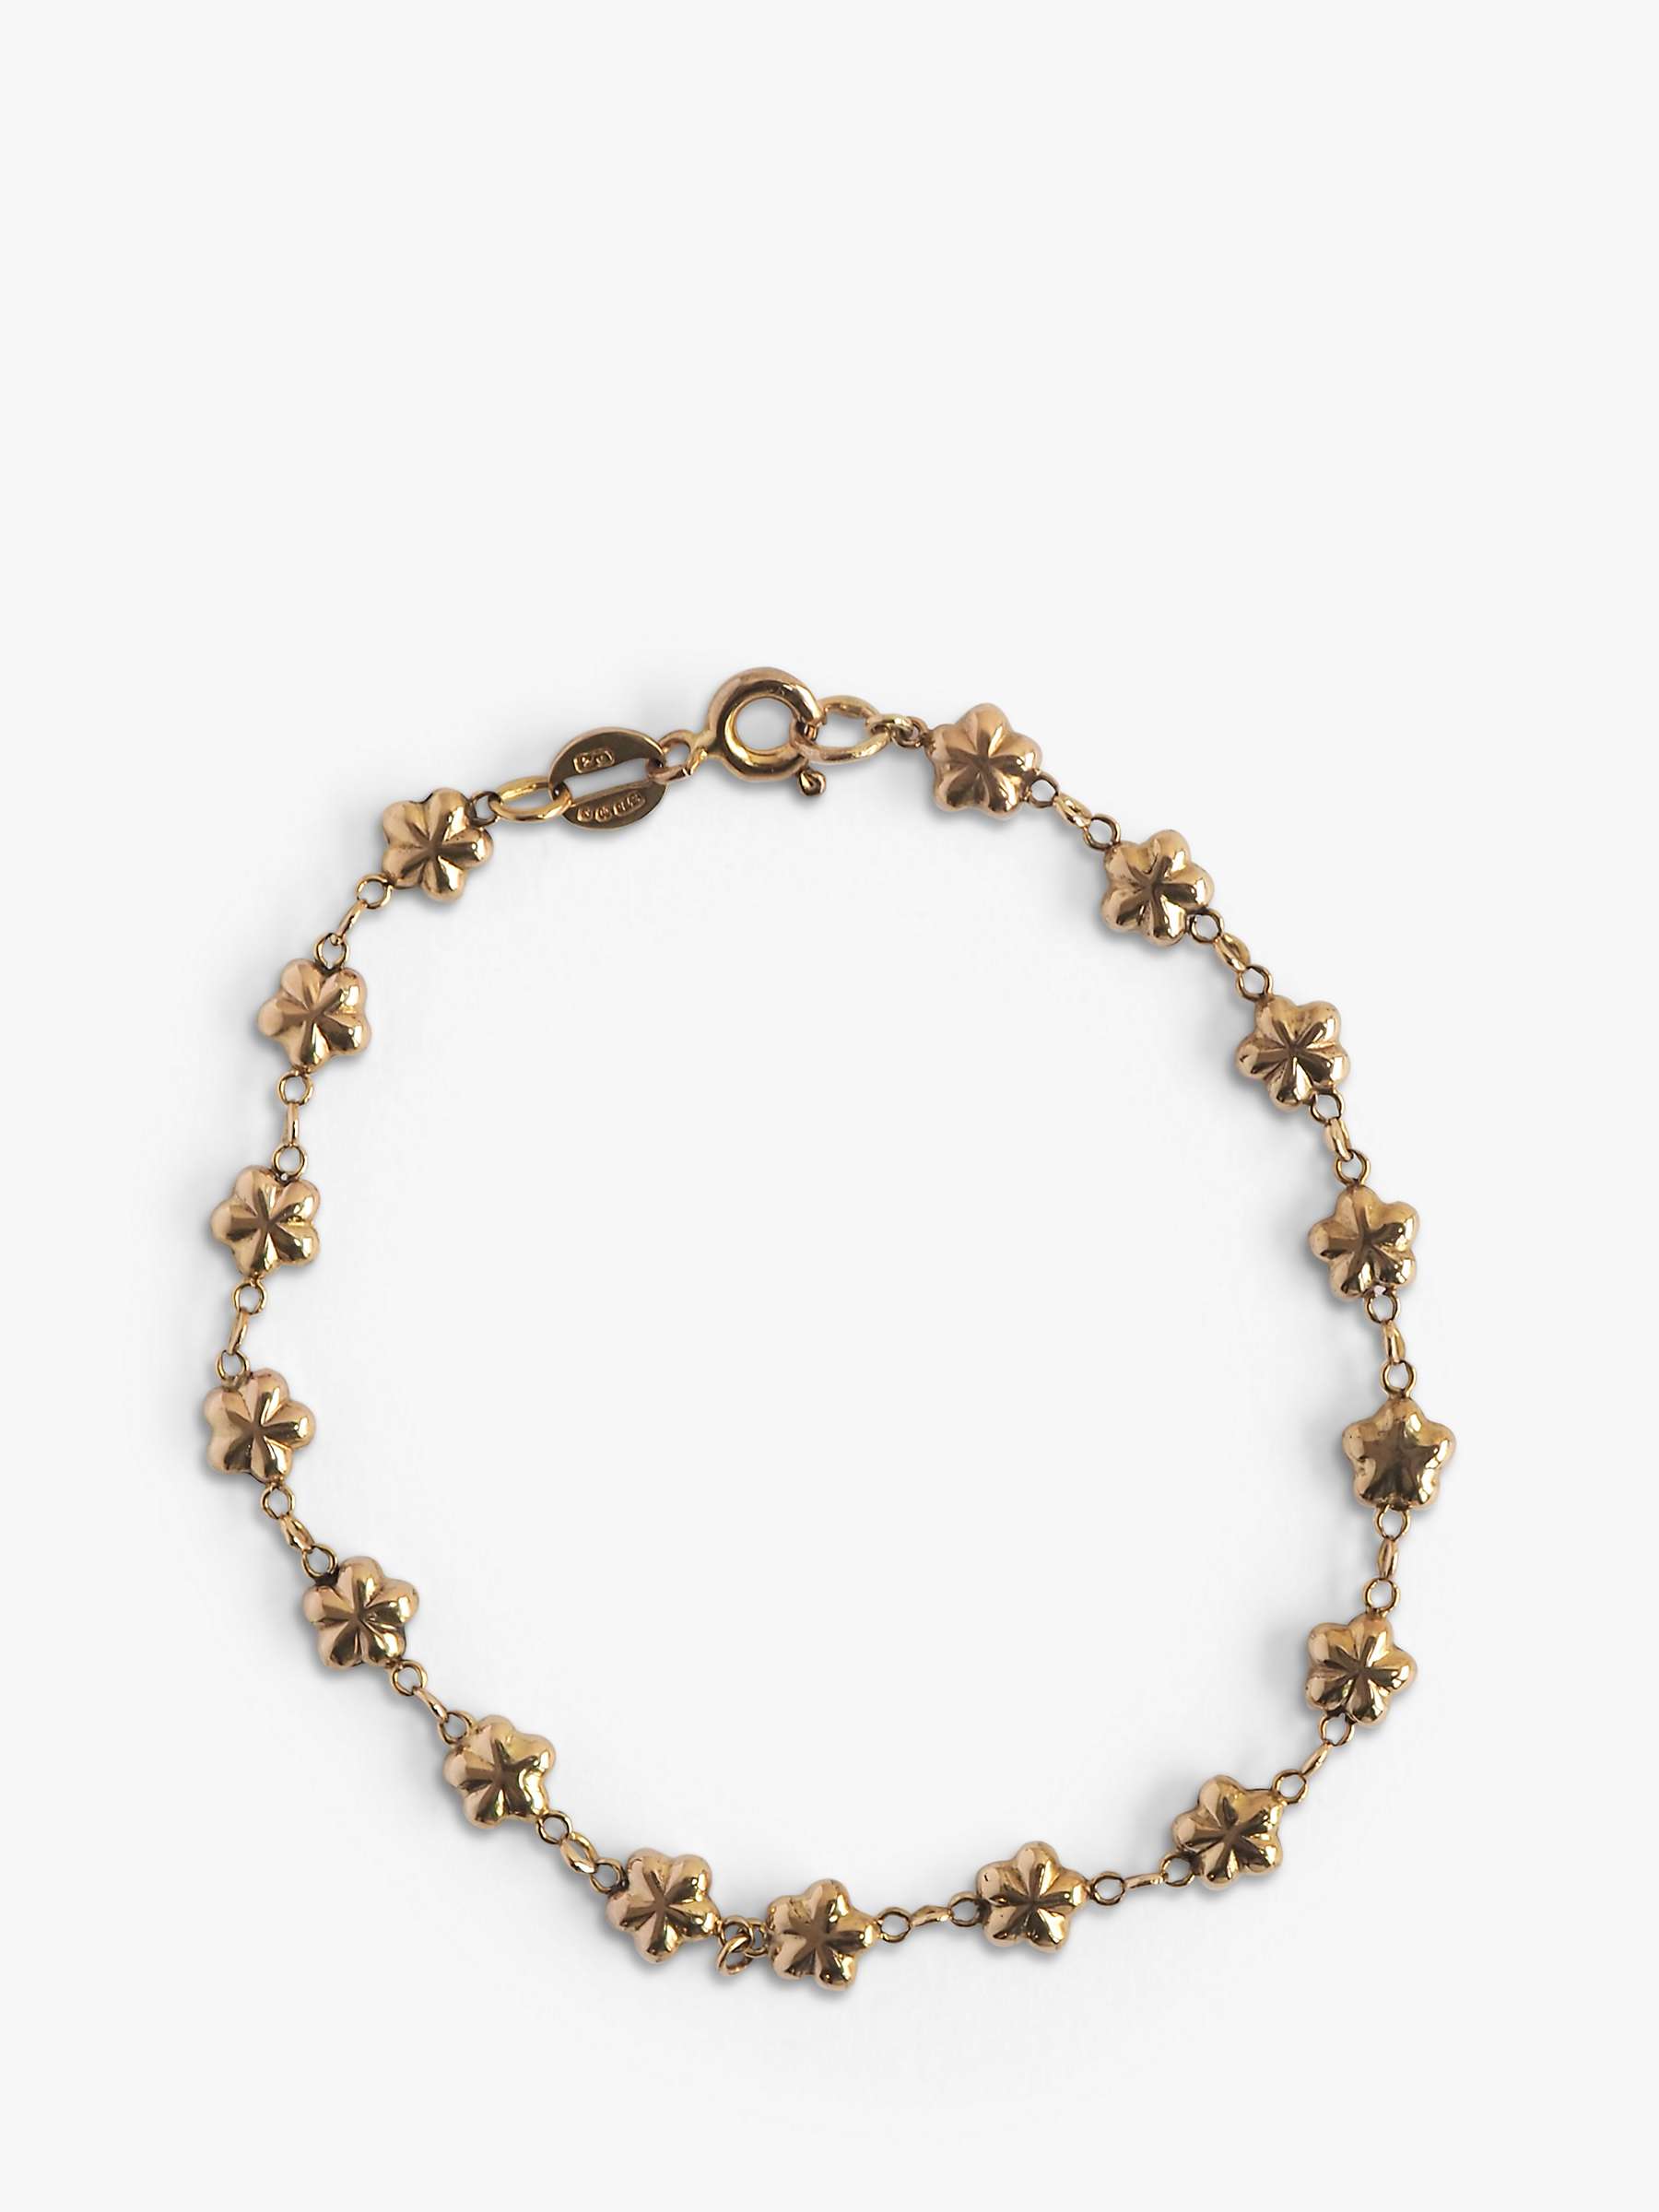 Buy L & T Heirlooms Second Hand 9ct Yellow Gold Small Flower Bracelet, Dated Circa 1981, Gold Online at johnlewis.com